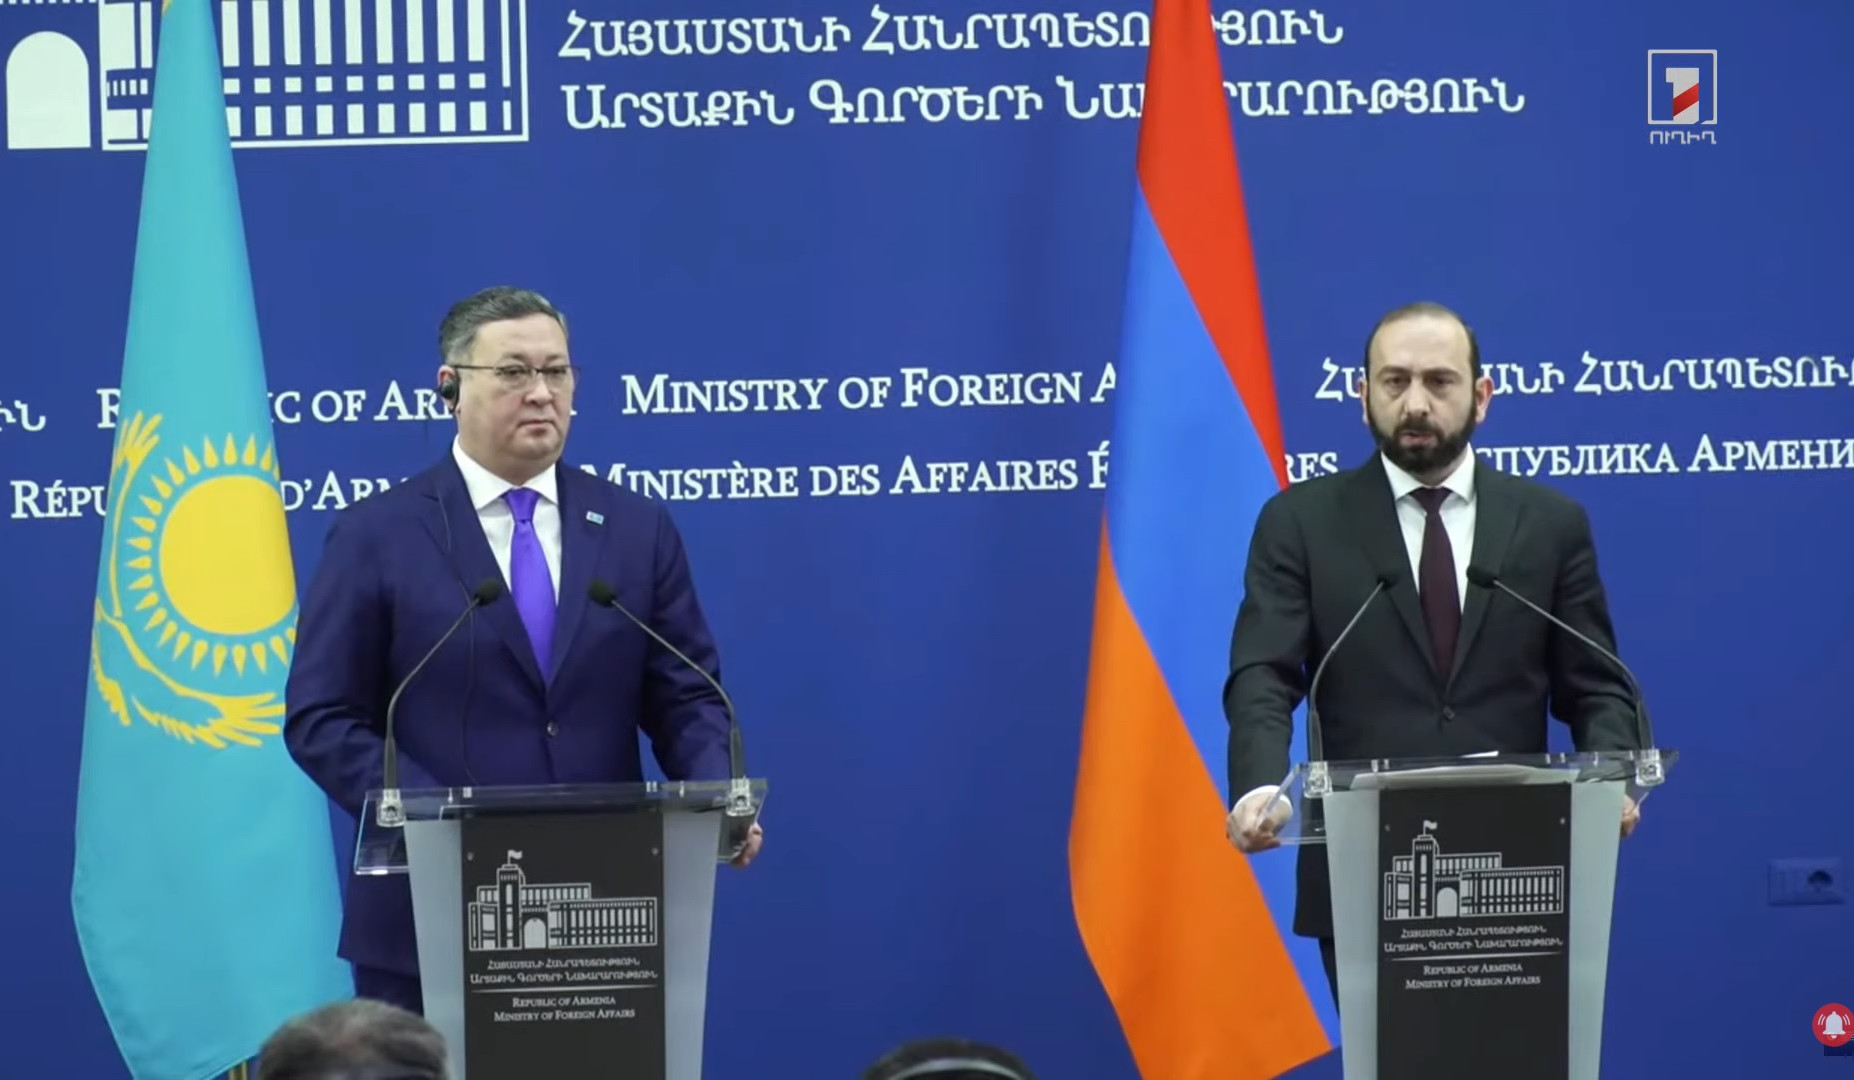 Discovery of new opportunities for Armenia and Kazakhstan is key and important: Mirzoyan